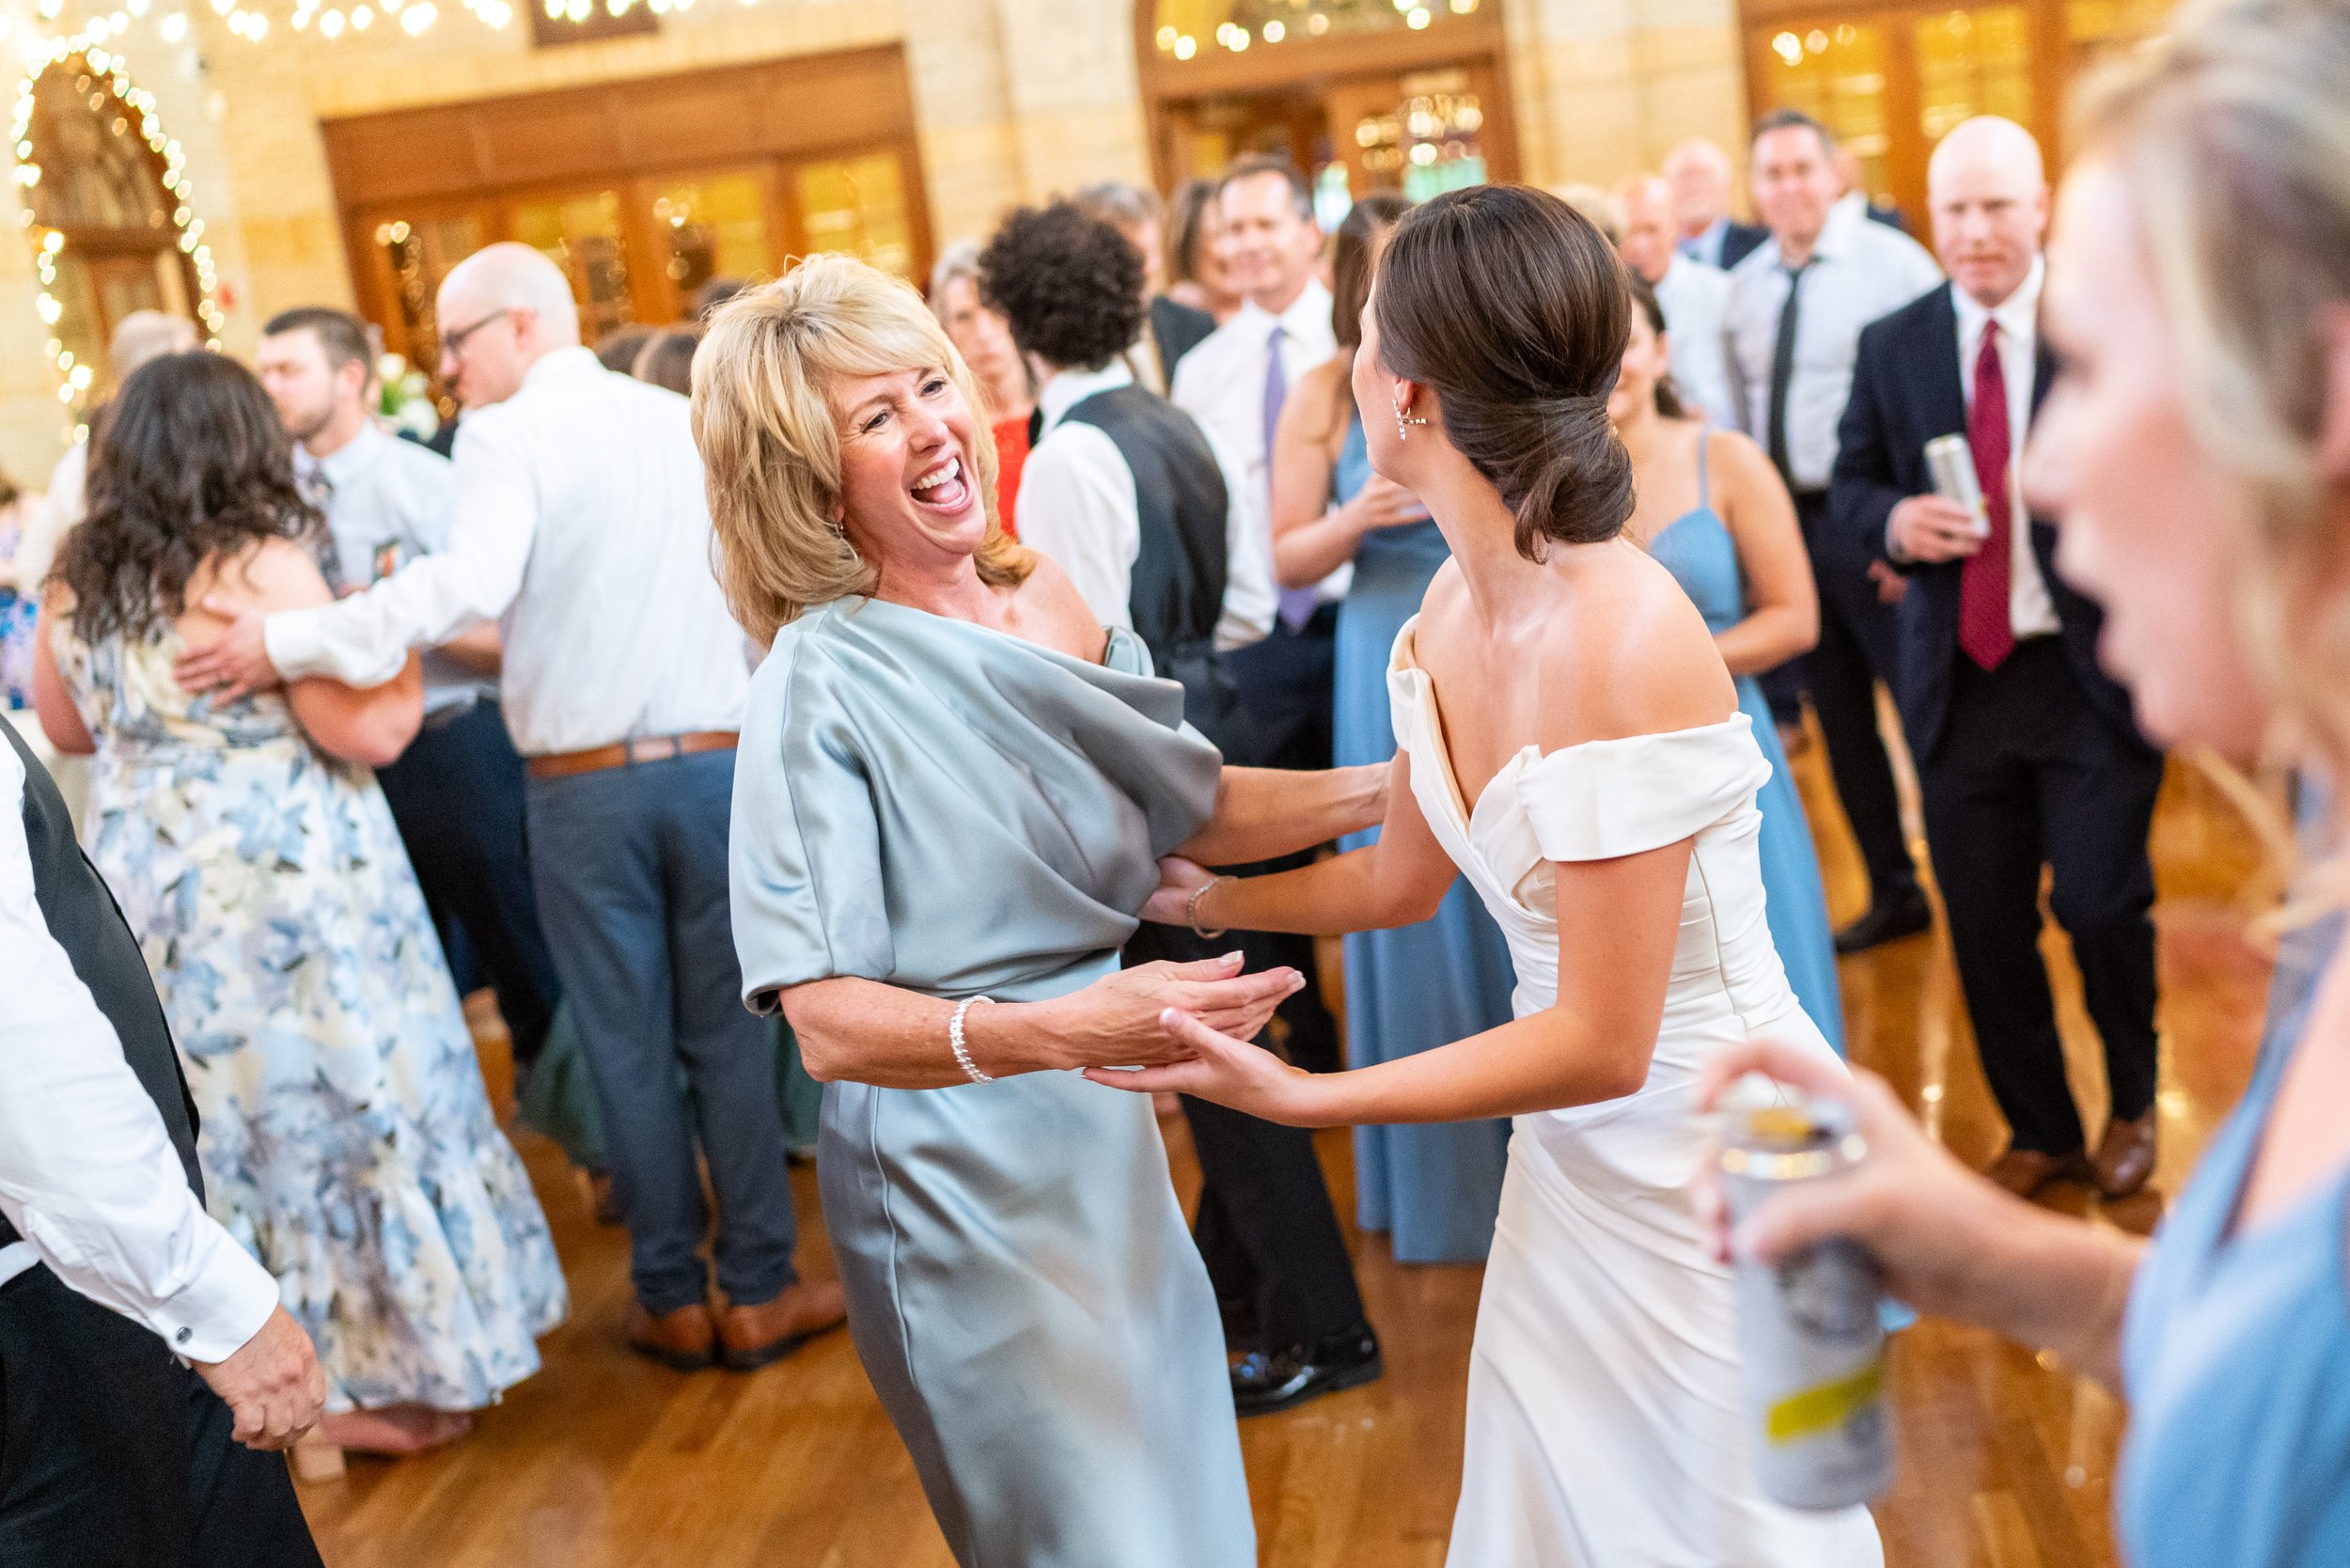 Bride dances with Mother of the groom at fun wedding photos at St Francis Hall